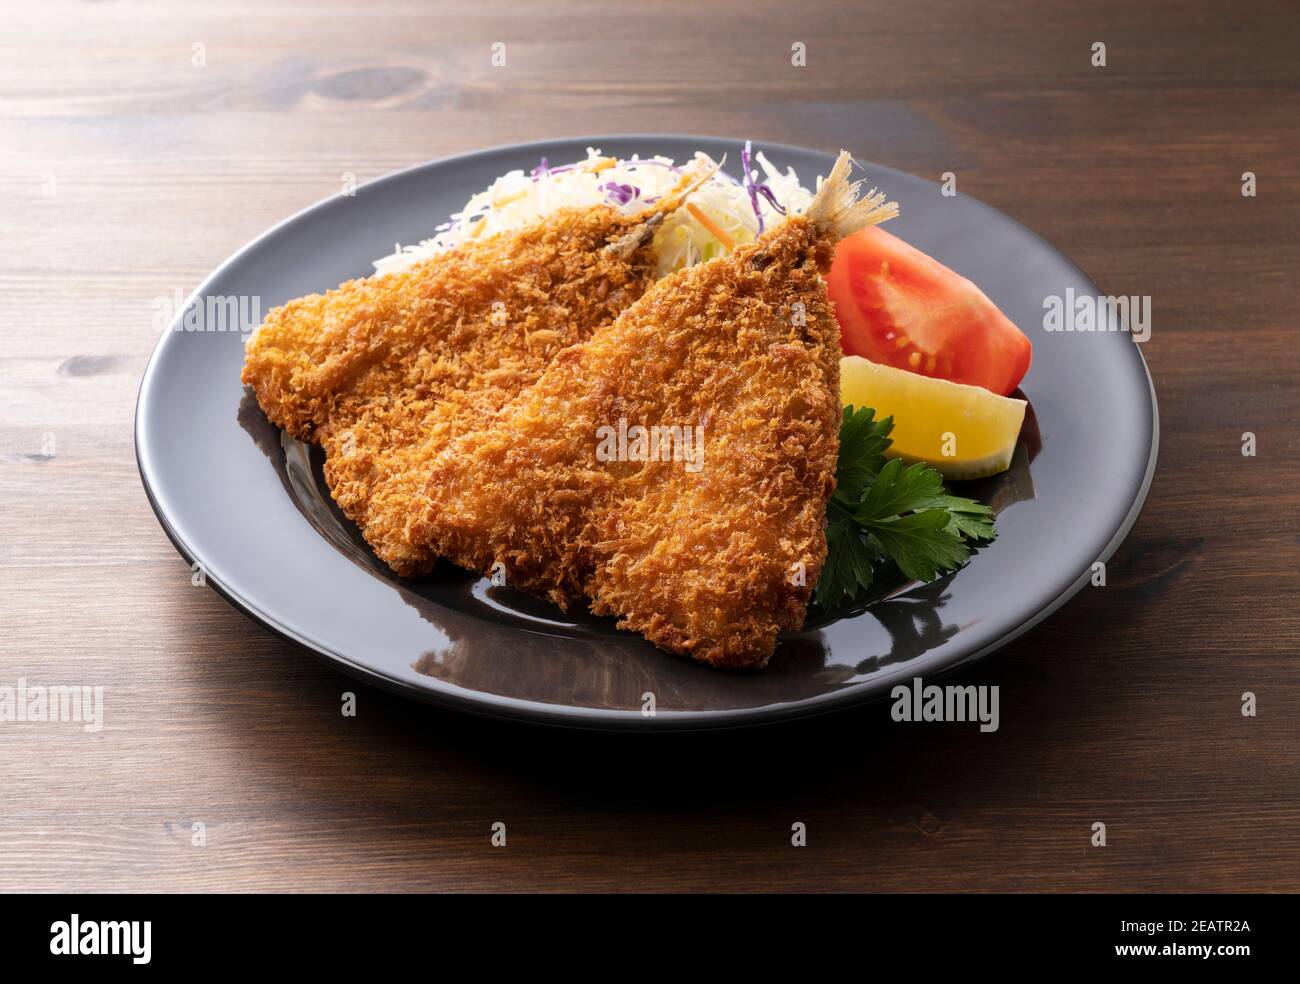 Fried horse mackerel served on a plate on a wooden background Stock Photo